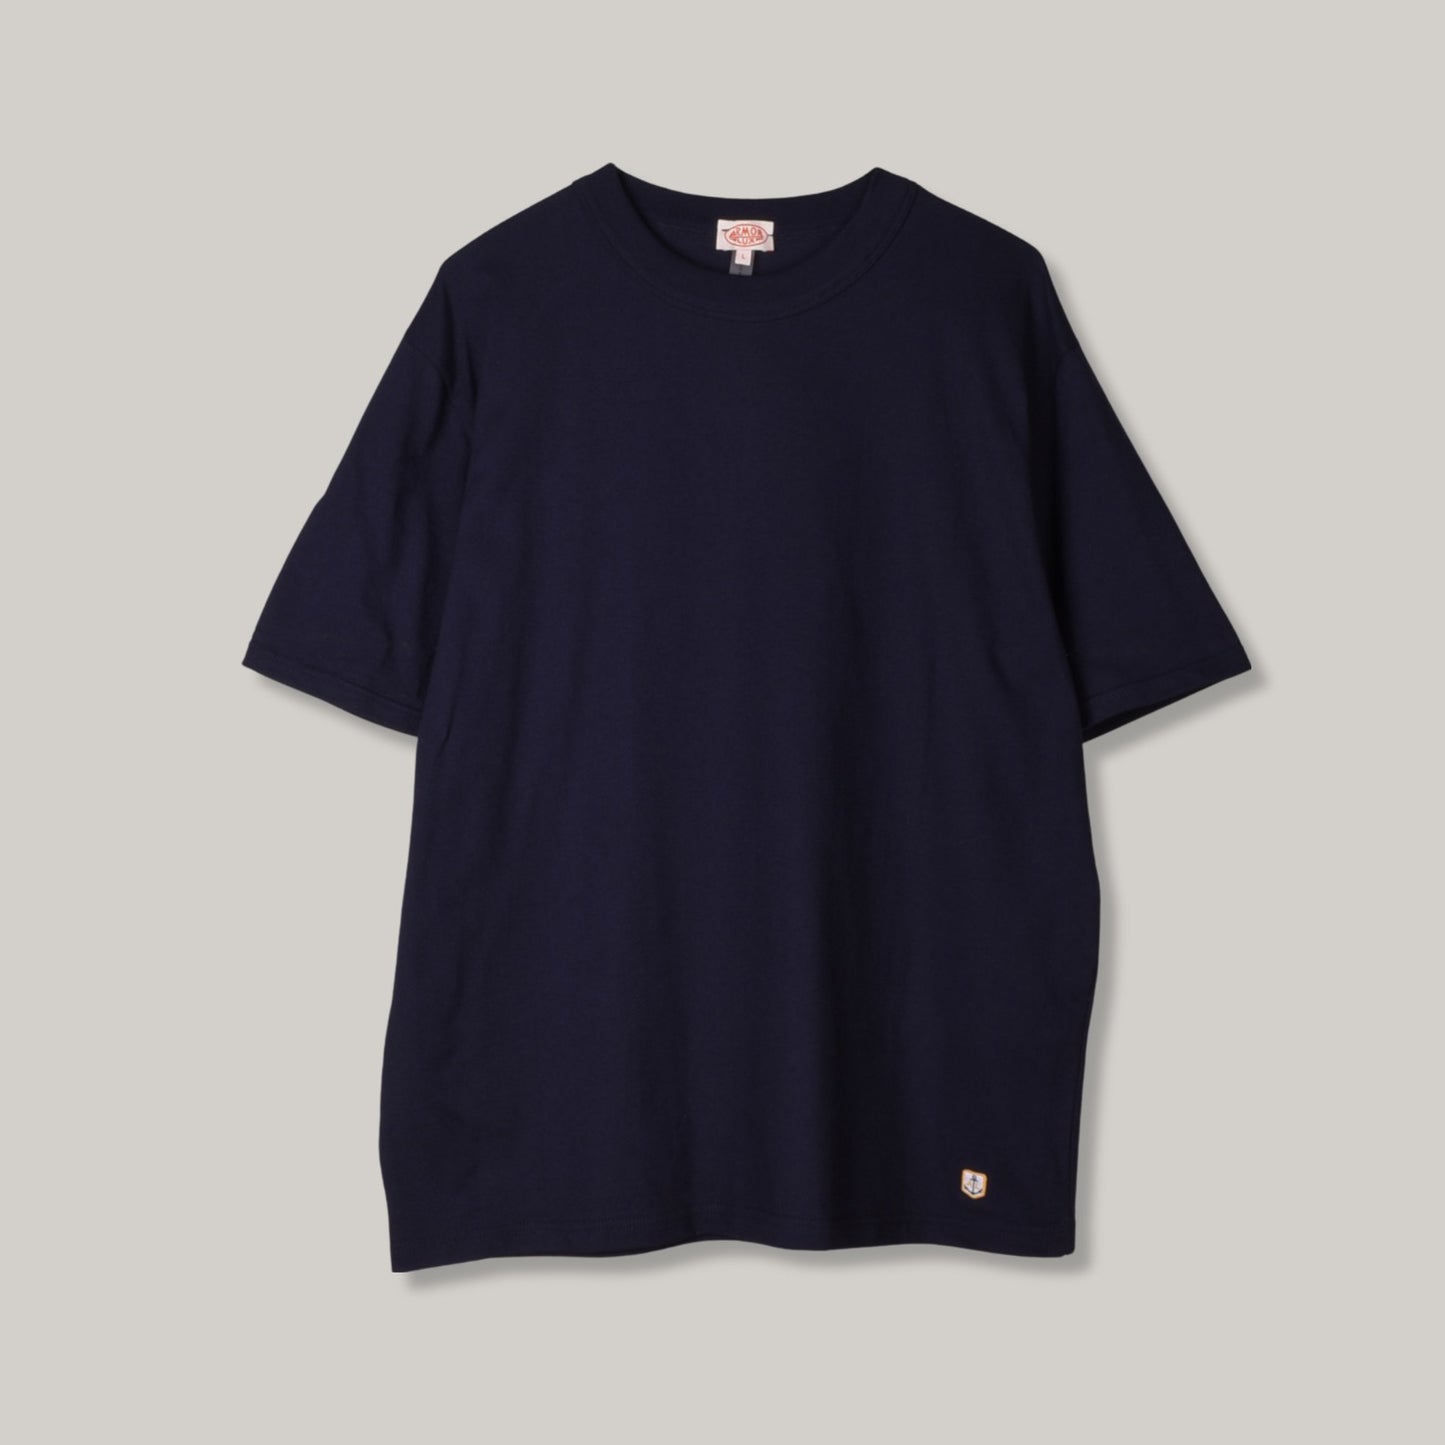 ARMOR LUX HERITAGE T-SHIRT - NAVIRE NAVY